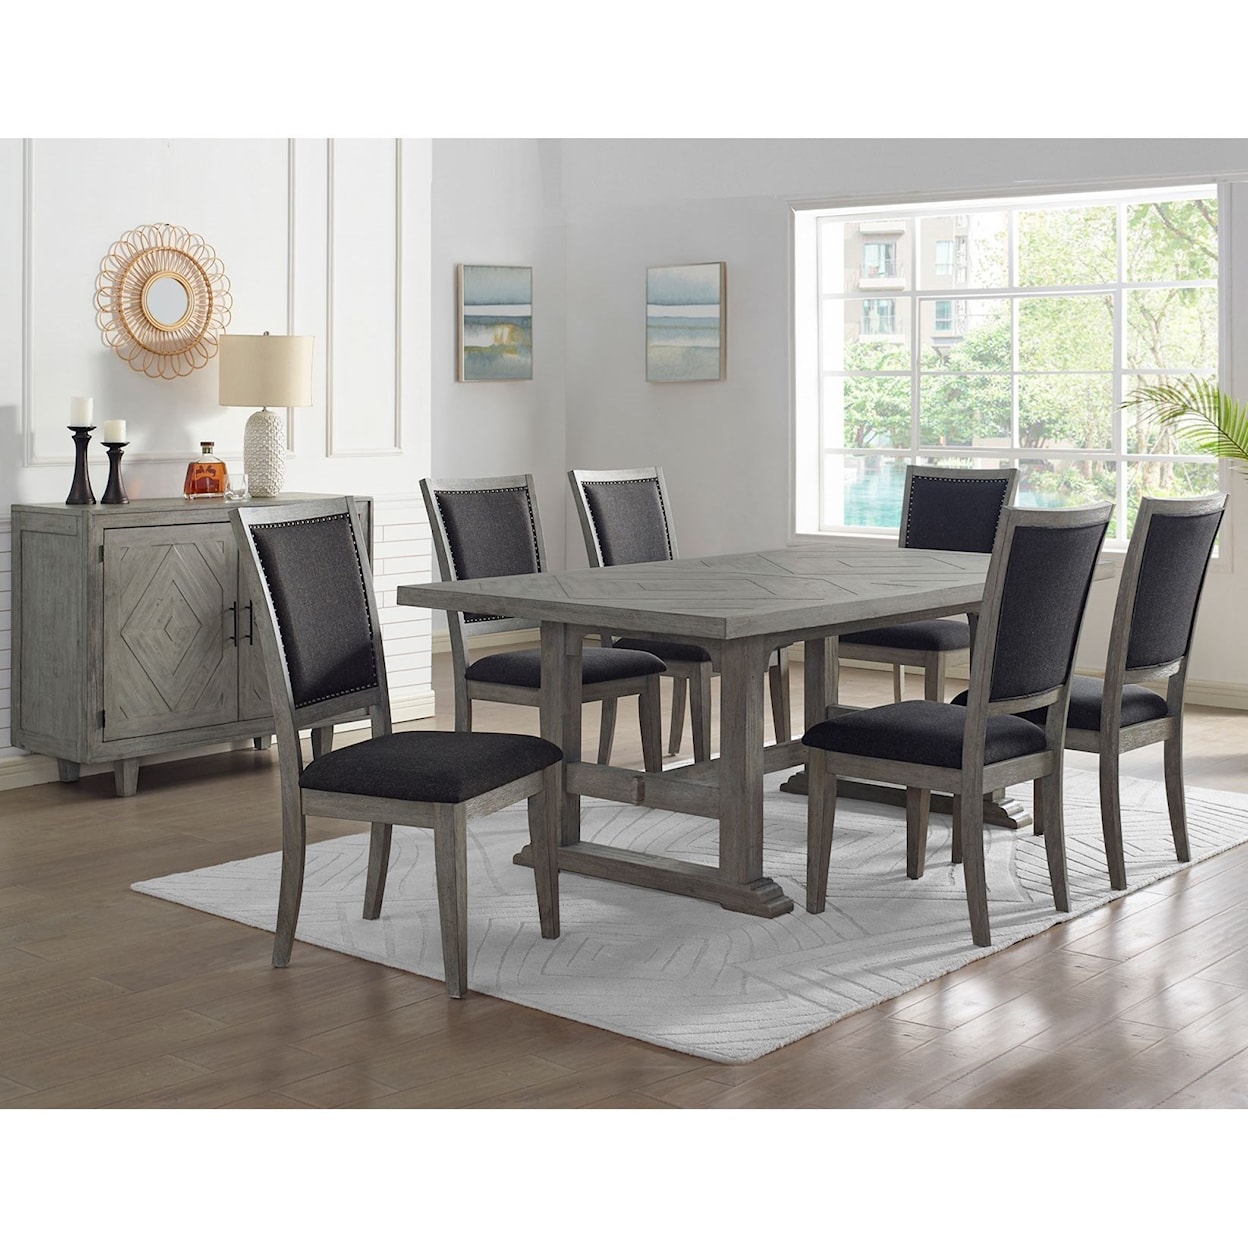 Steve Silver Whitford Dining Room Group